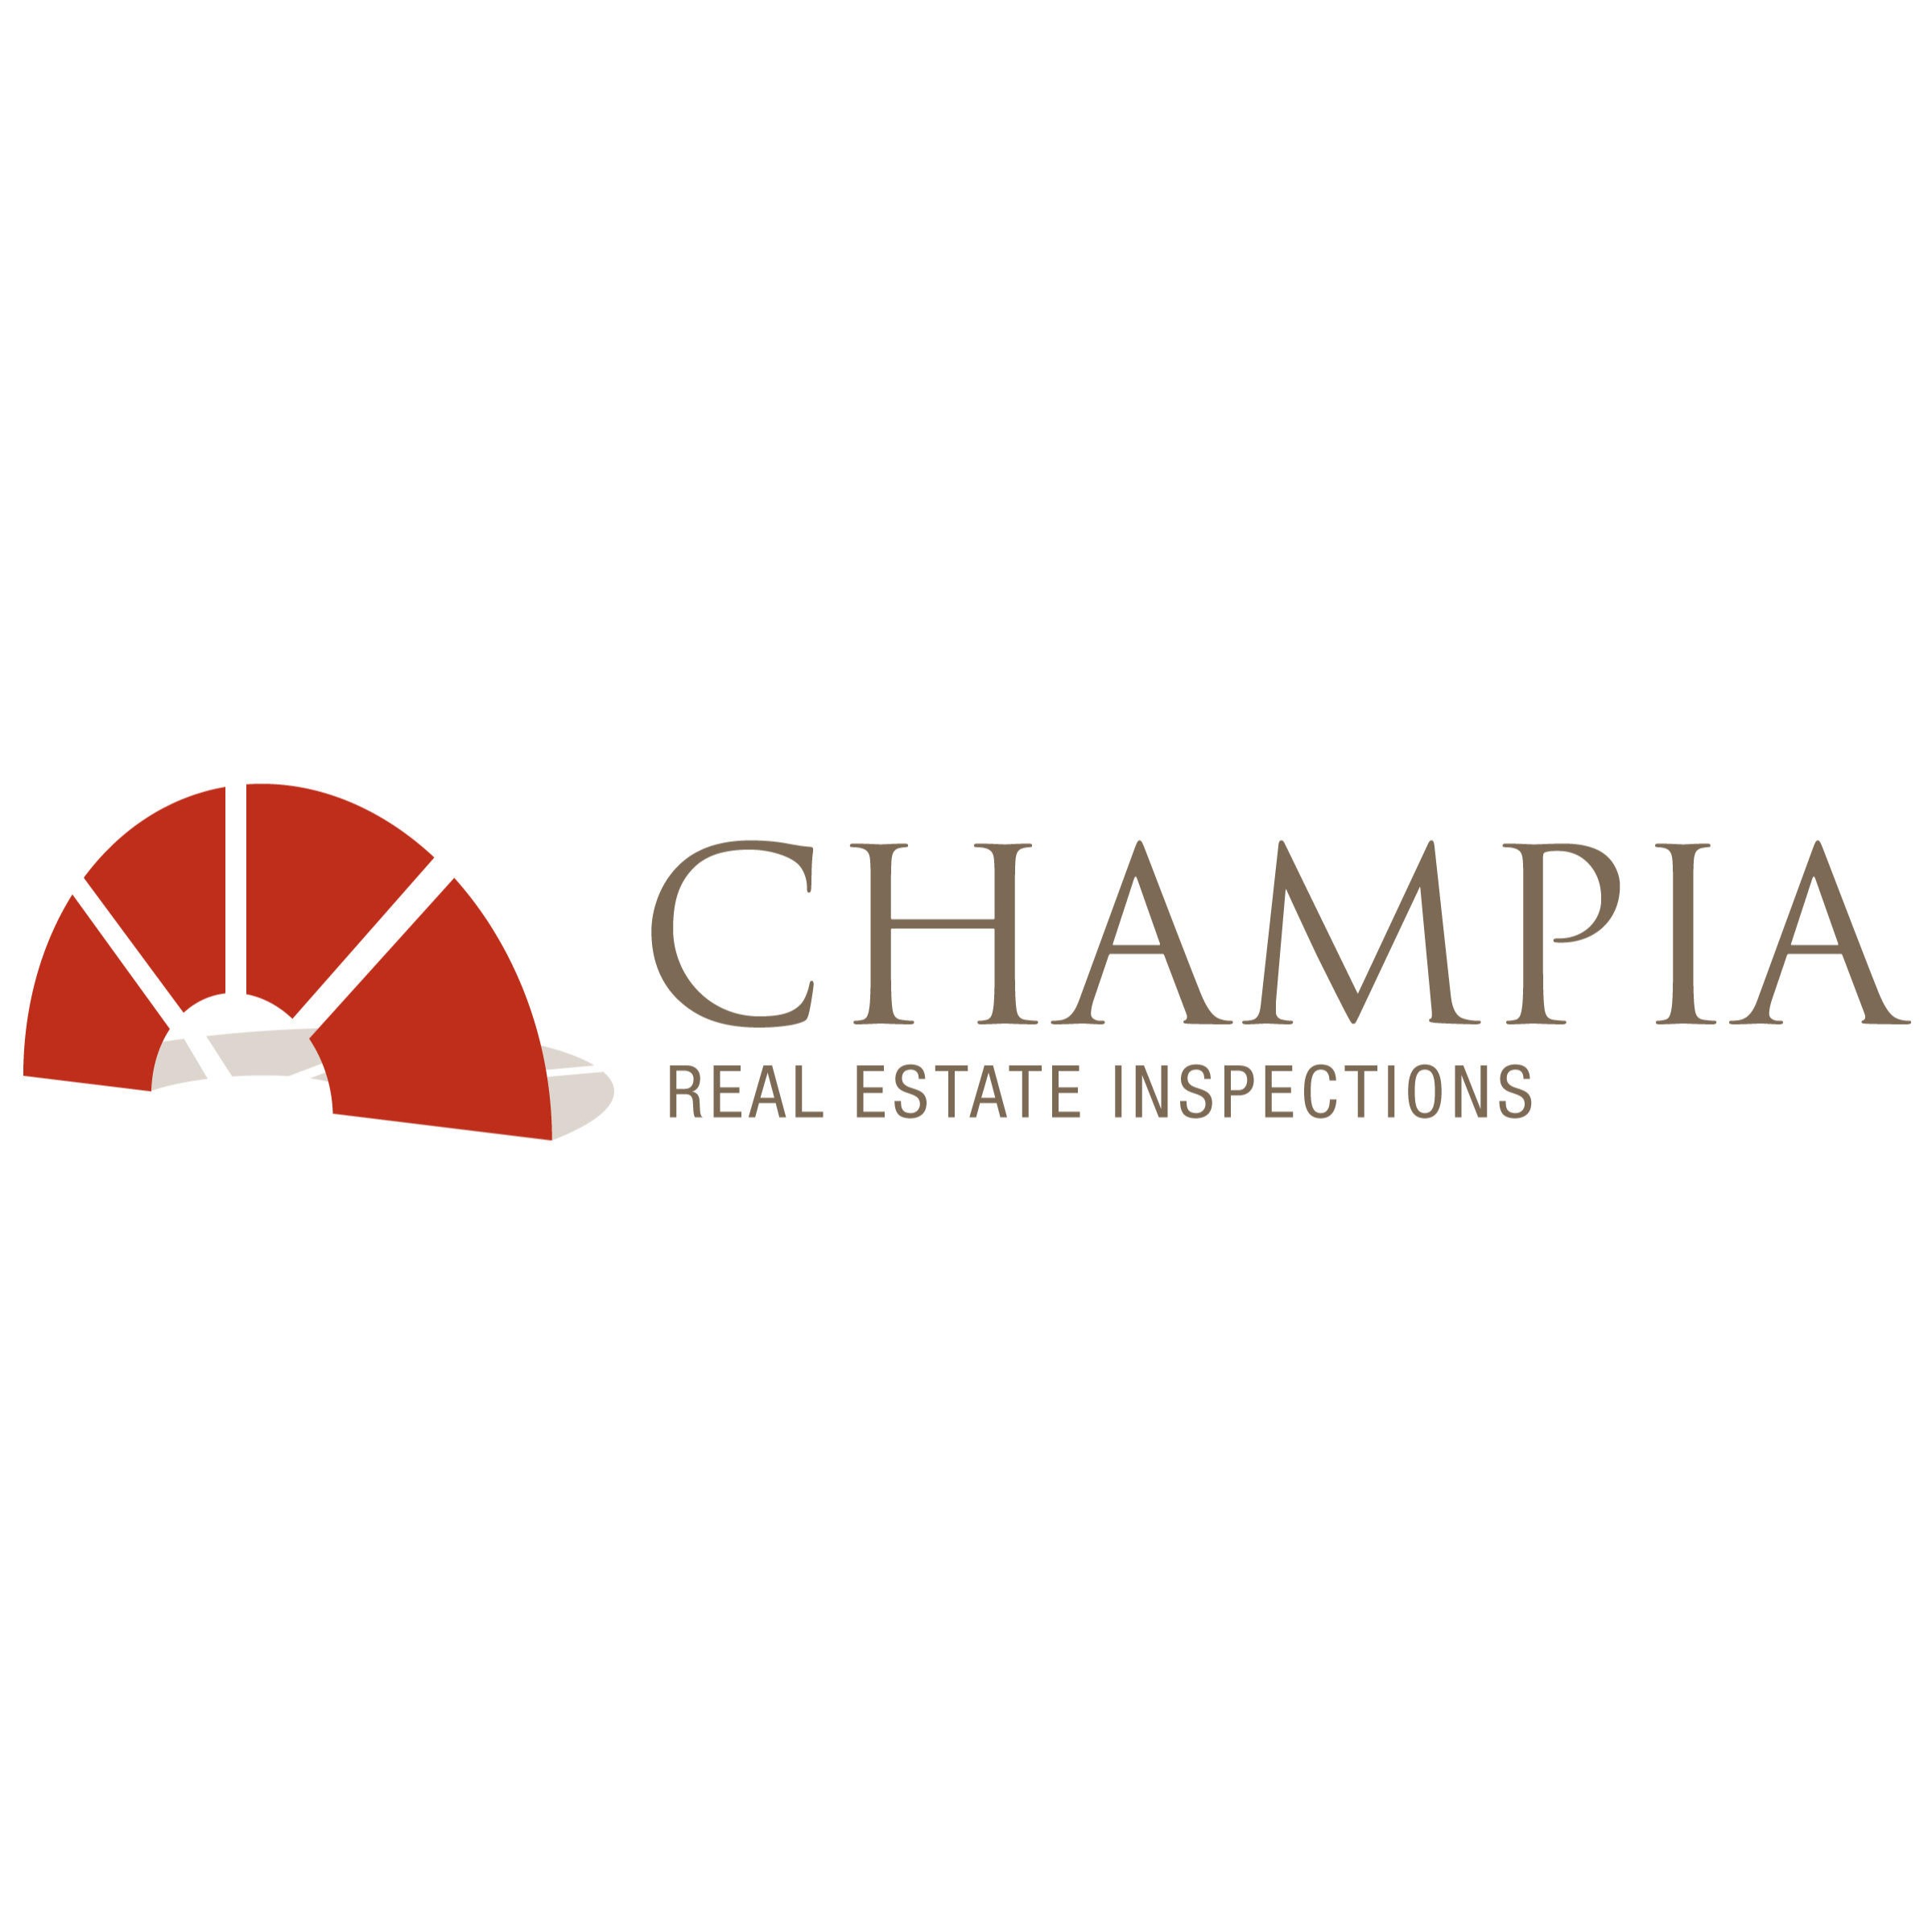 Champia Real Estate Inspections Logo